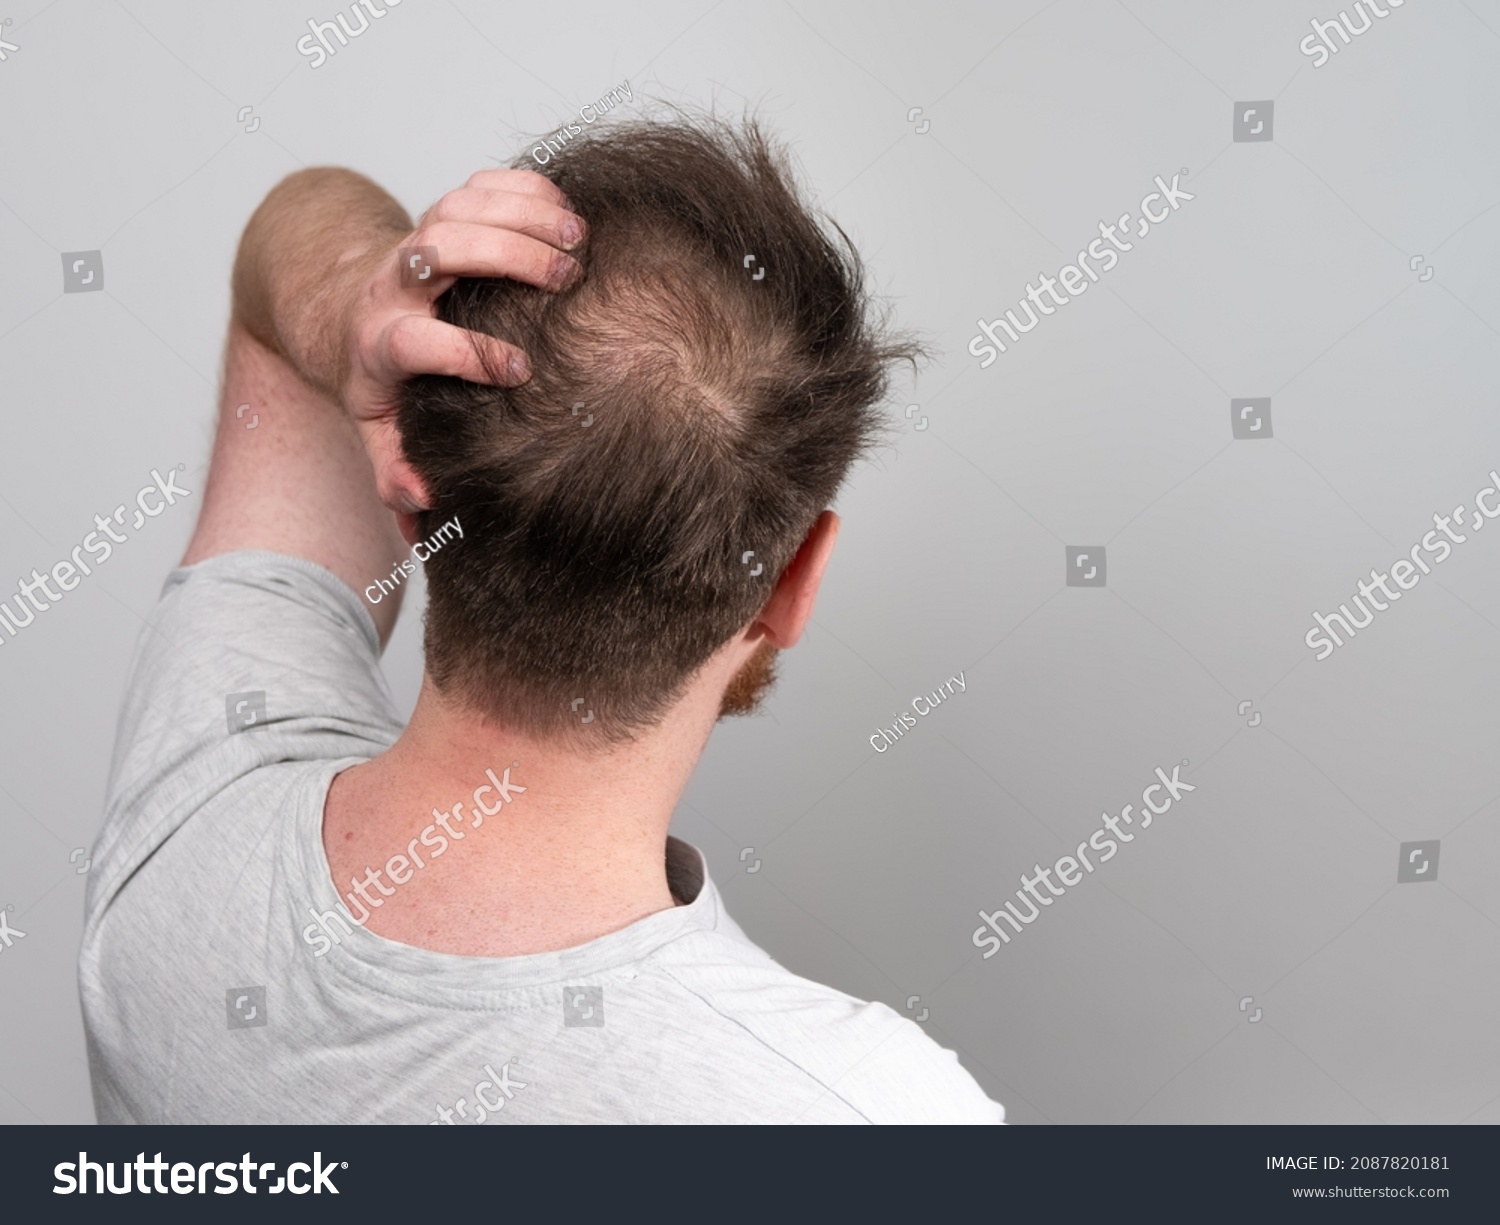 Behind view of a young balding man's head showing clear signs of balding and hair loss around the scalp. Male pattern baldness concept against a clear white background with room for text. #2087820181